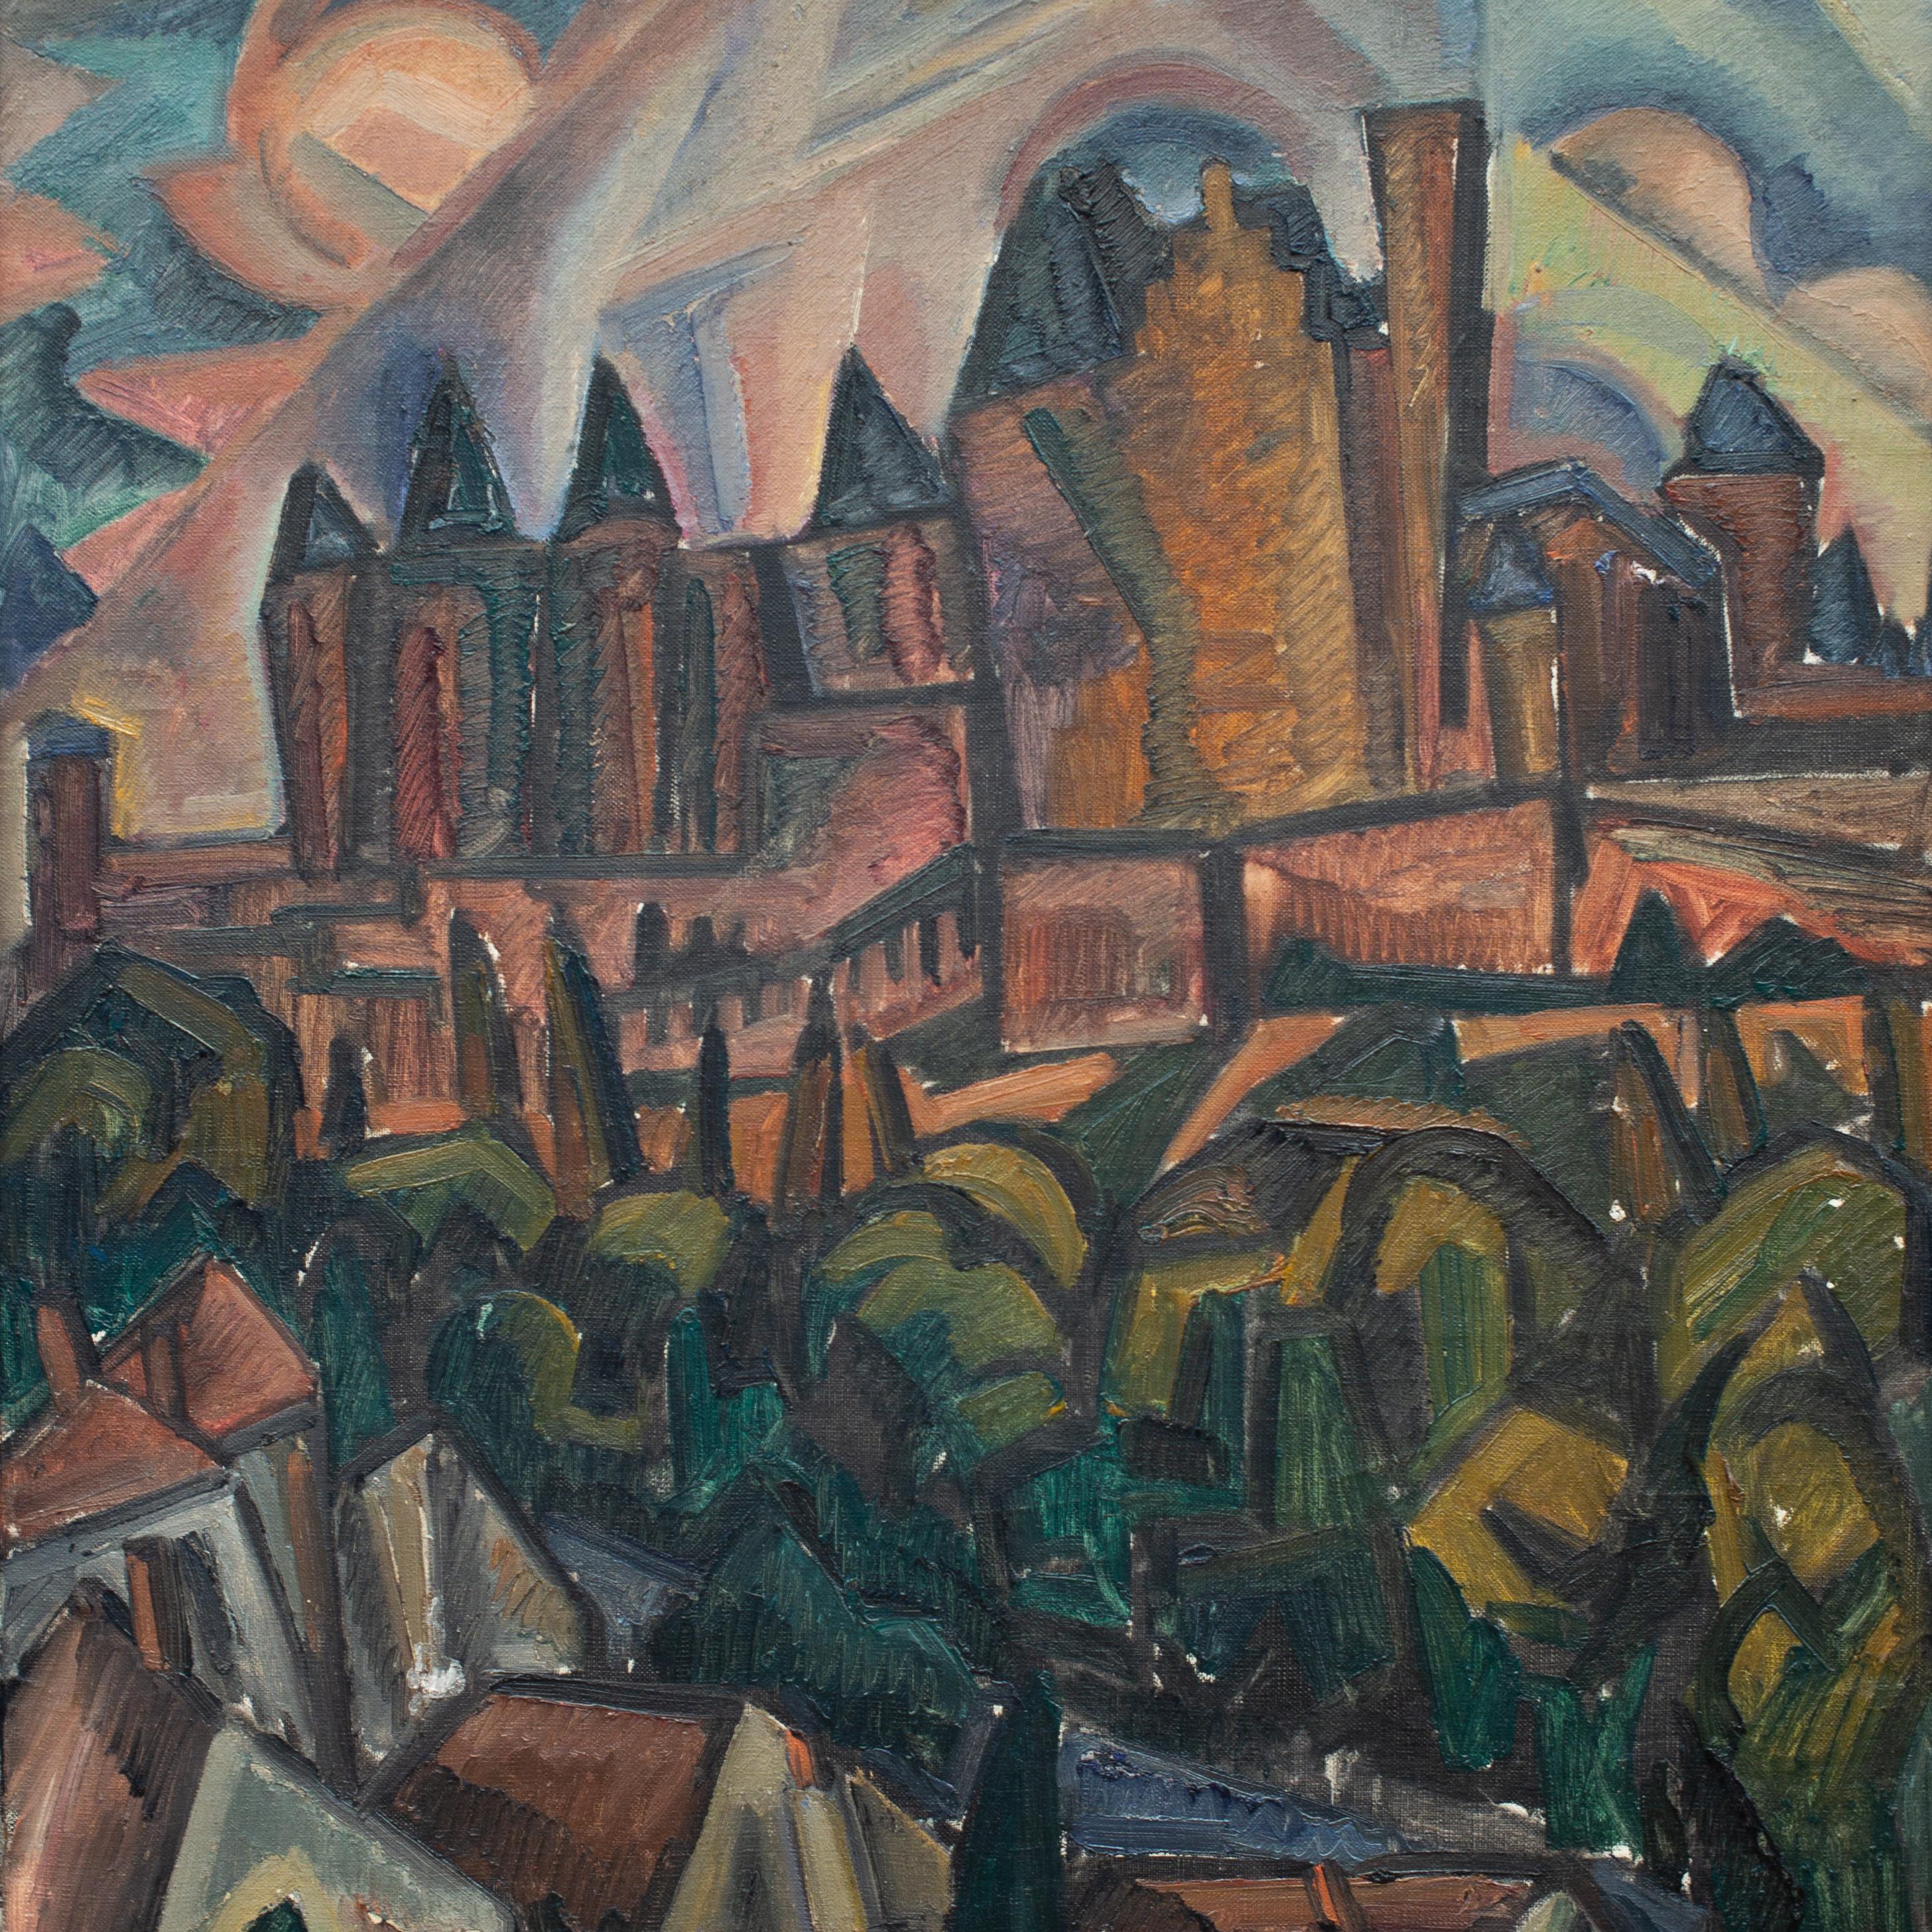 Dick Beer (b. London 1893 - d. Stockholm 1938) 

A French City, 1919 (Fransk stad)

oil on canvas
canvas dimensions 82x66 cm 
frame 94x78.5 cm
signed Dick Beer
painted 1919

Exhibited:
Gothenburg Art Gallery, Memorial exhibition, 1944;
Åmells